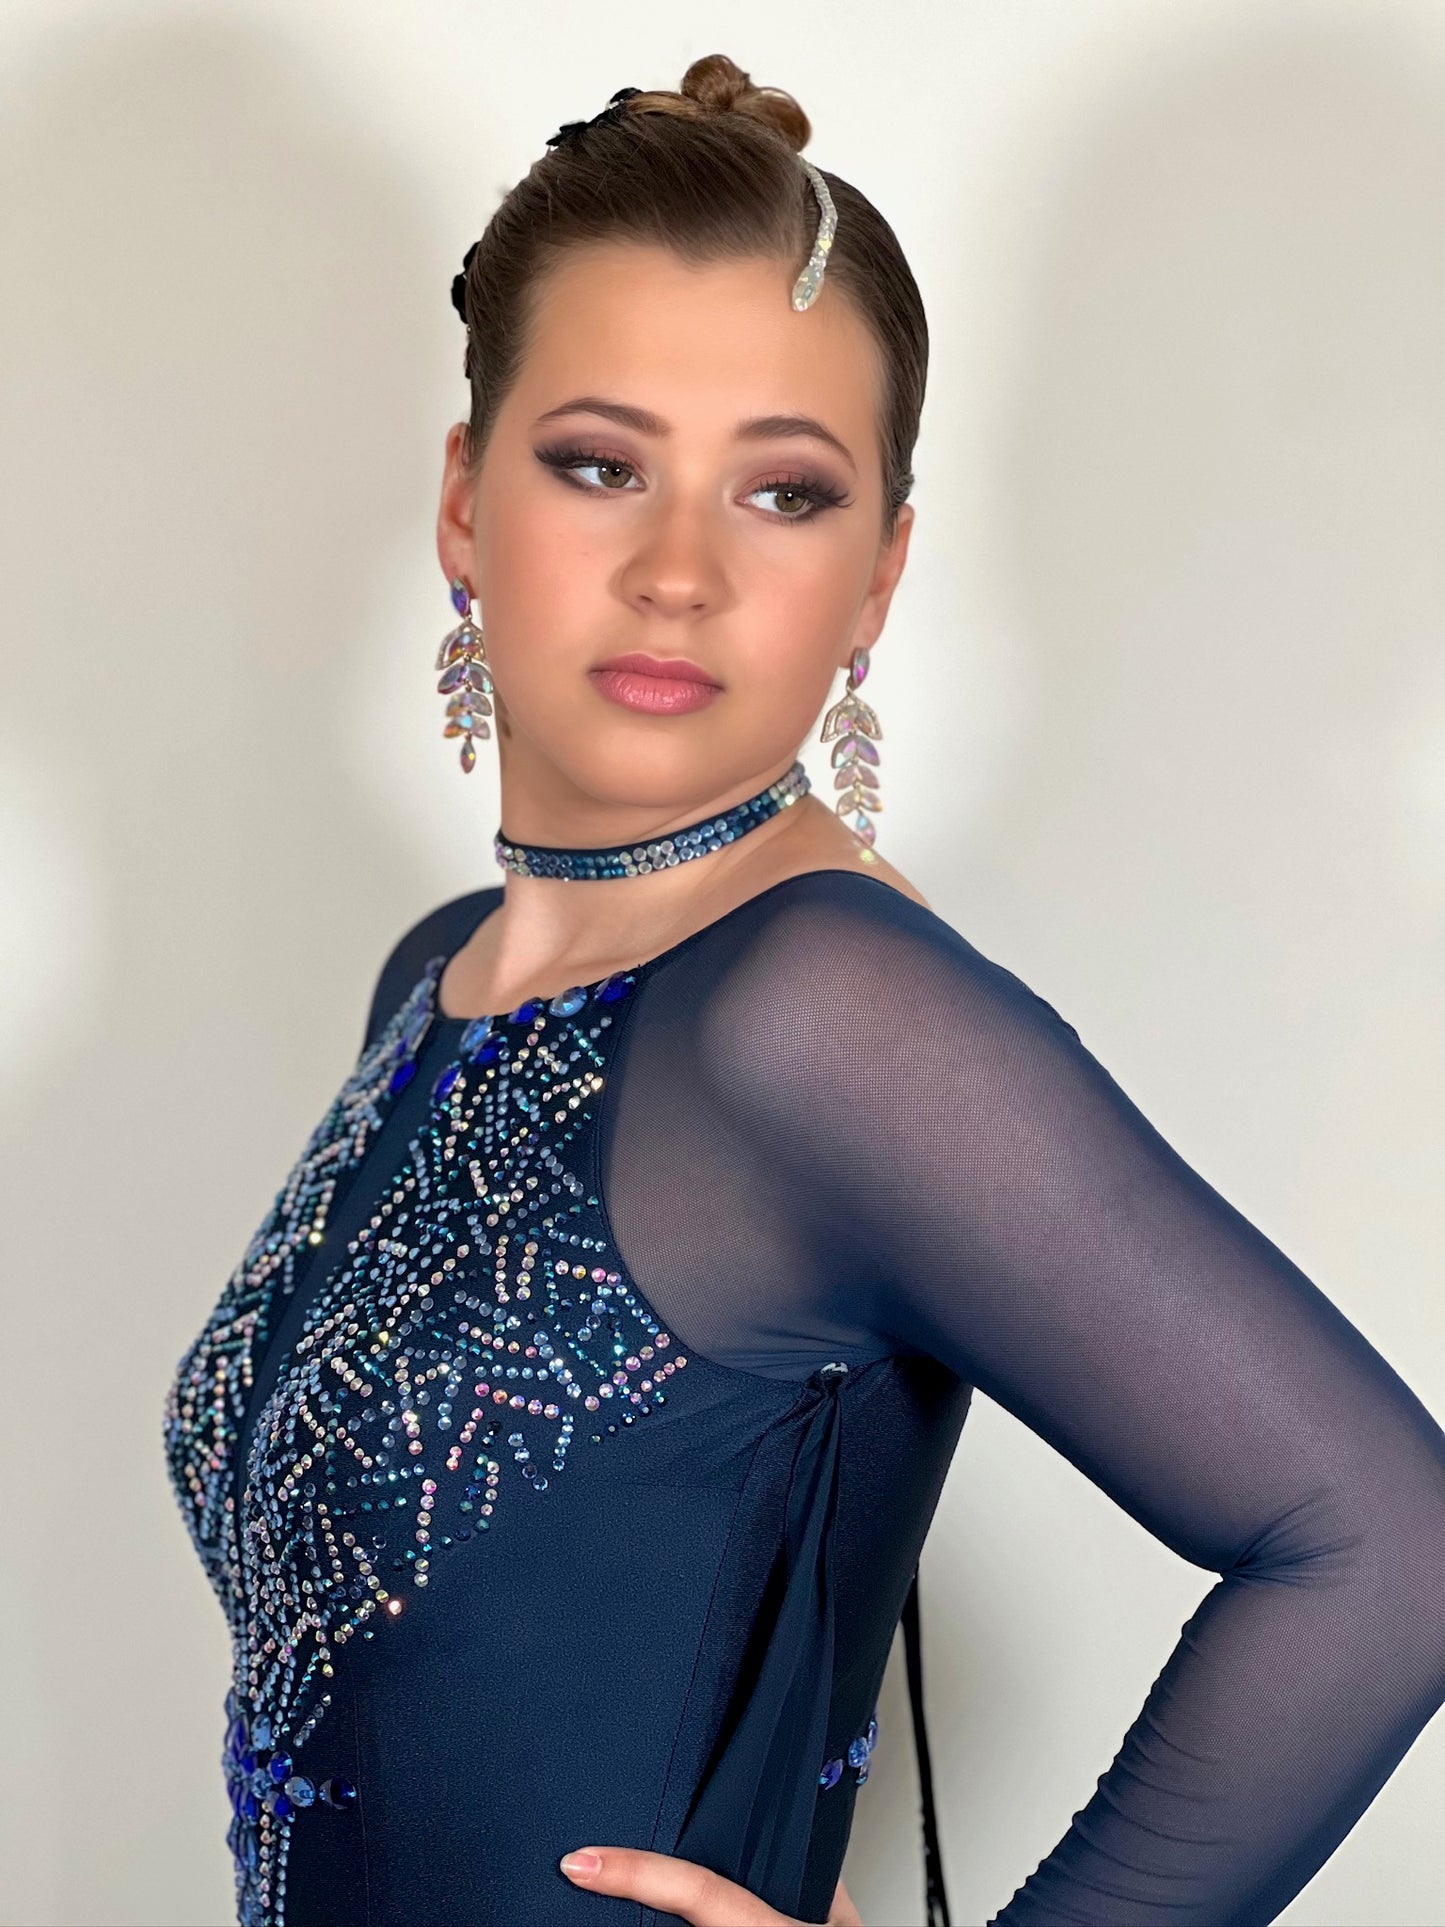 0333 Midnight Blue Competition Ballroom Dress. Stoned with sapphire, capri blue & AB stones. Sophisticated & demure.